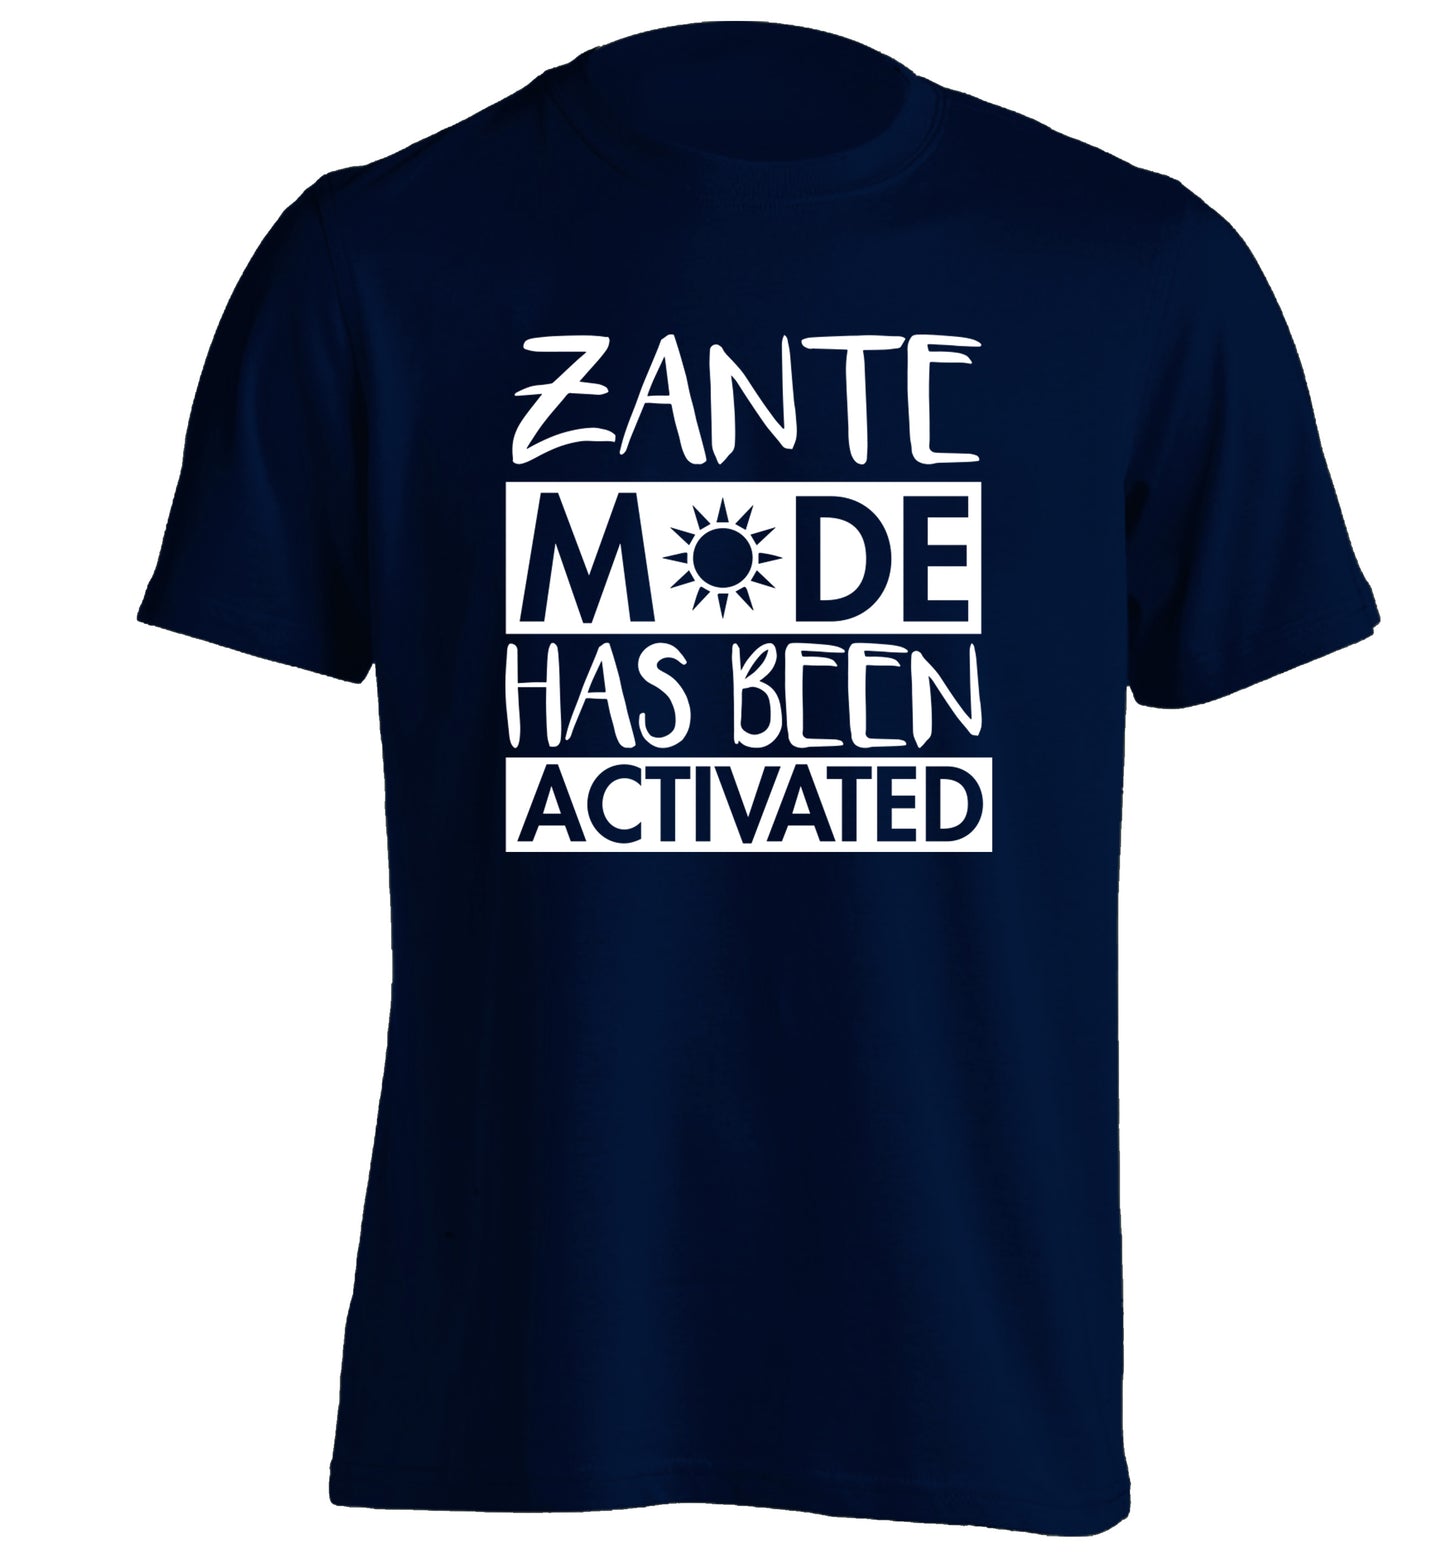 Zante mode has been activated adults unisex navy Tshirt 2XL